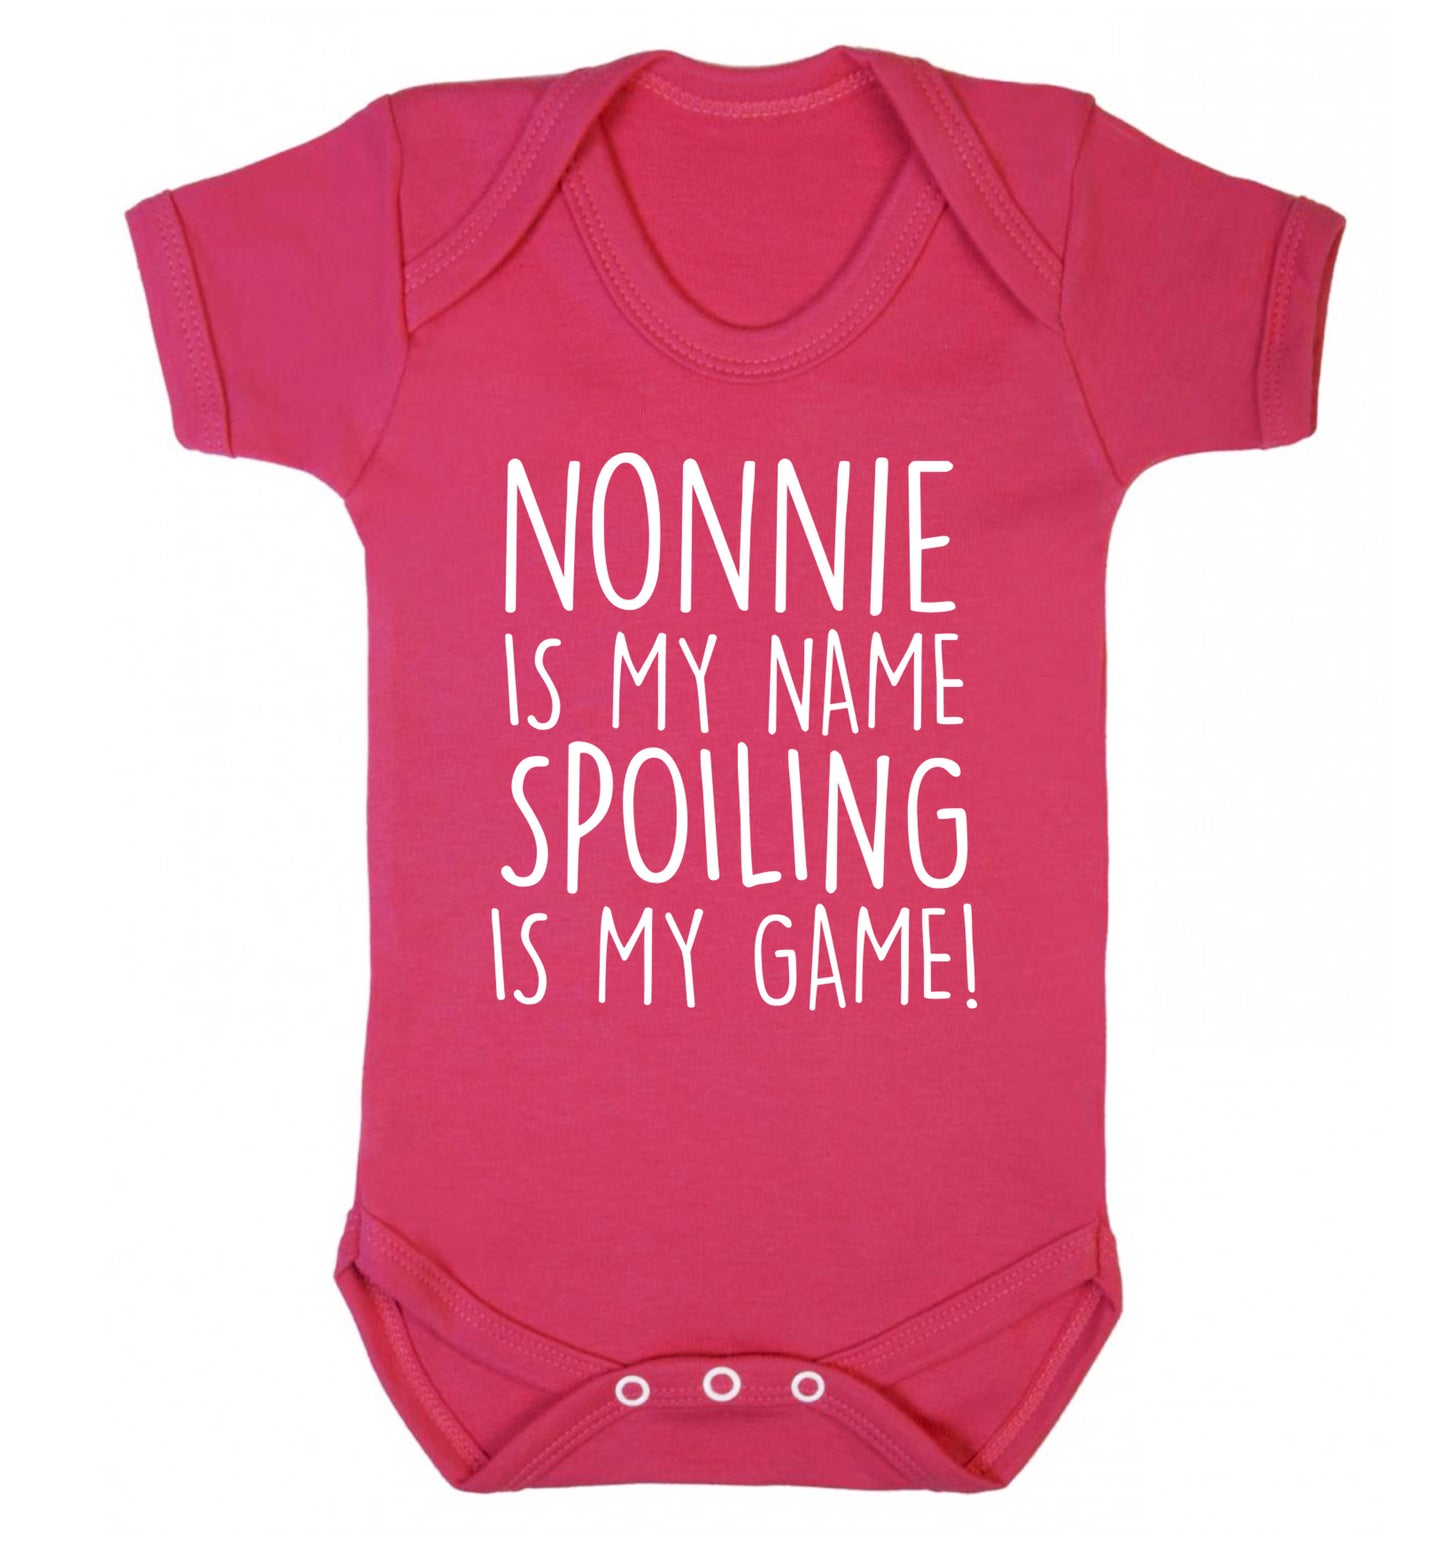 Nonnie is my name, spoiling is my game Baby Vest dark pink 18-24 months